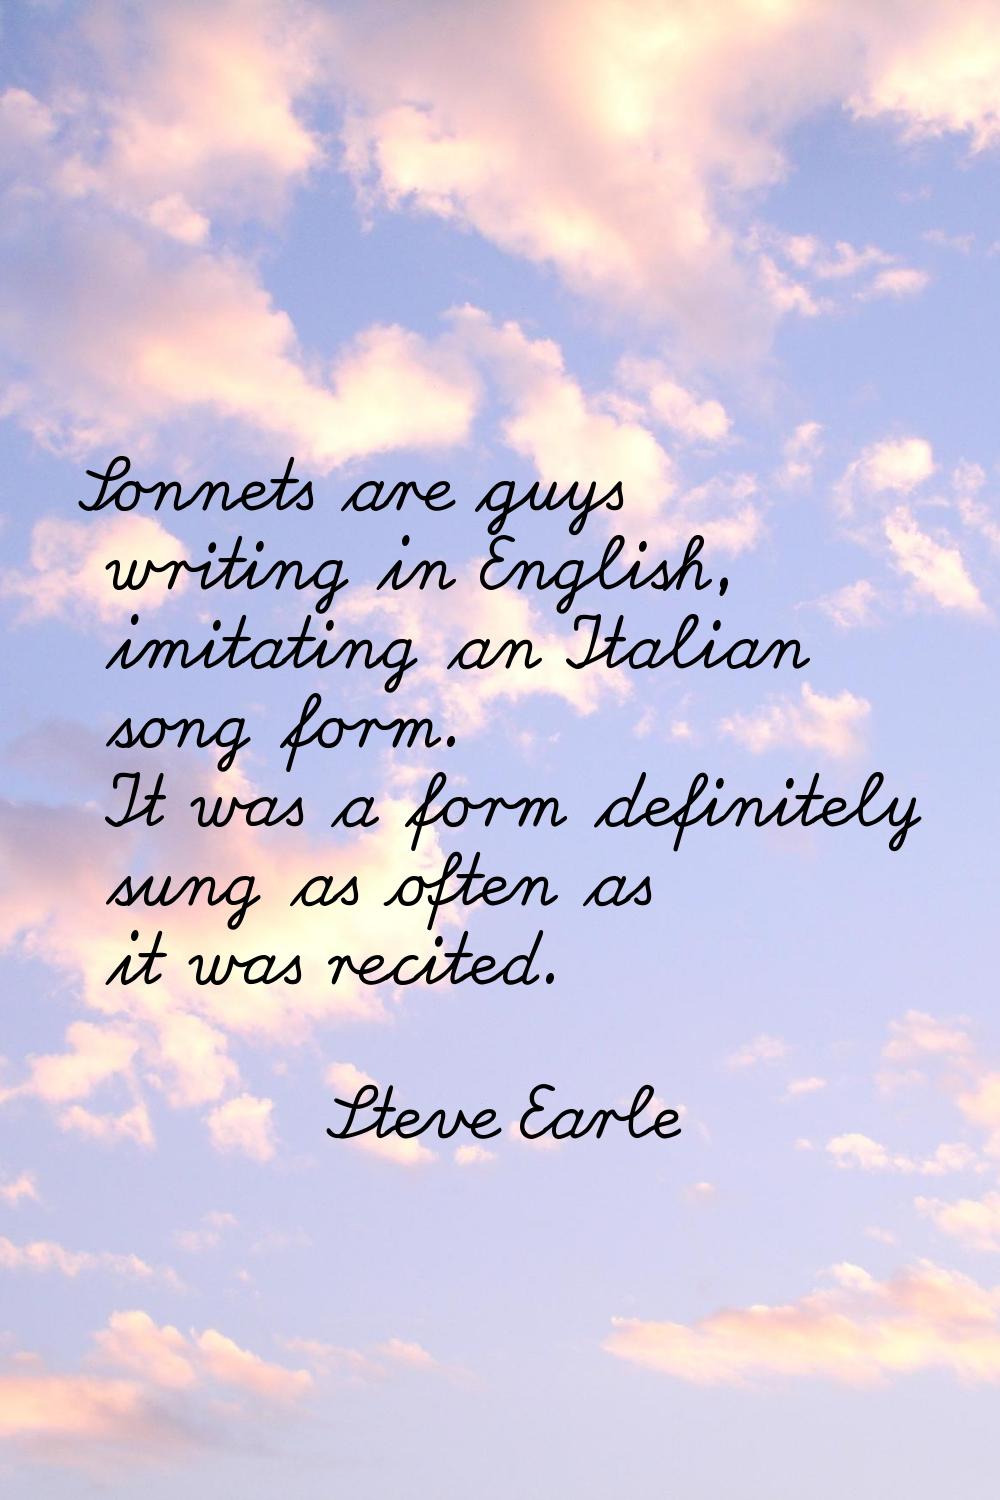 Sonnets are guys writing in English, imitating an Italian song form. It was a form definitely sung 